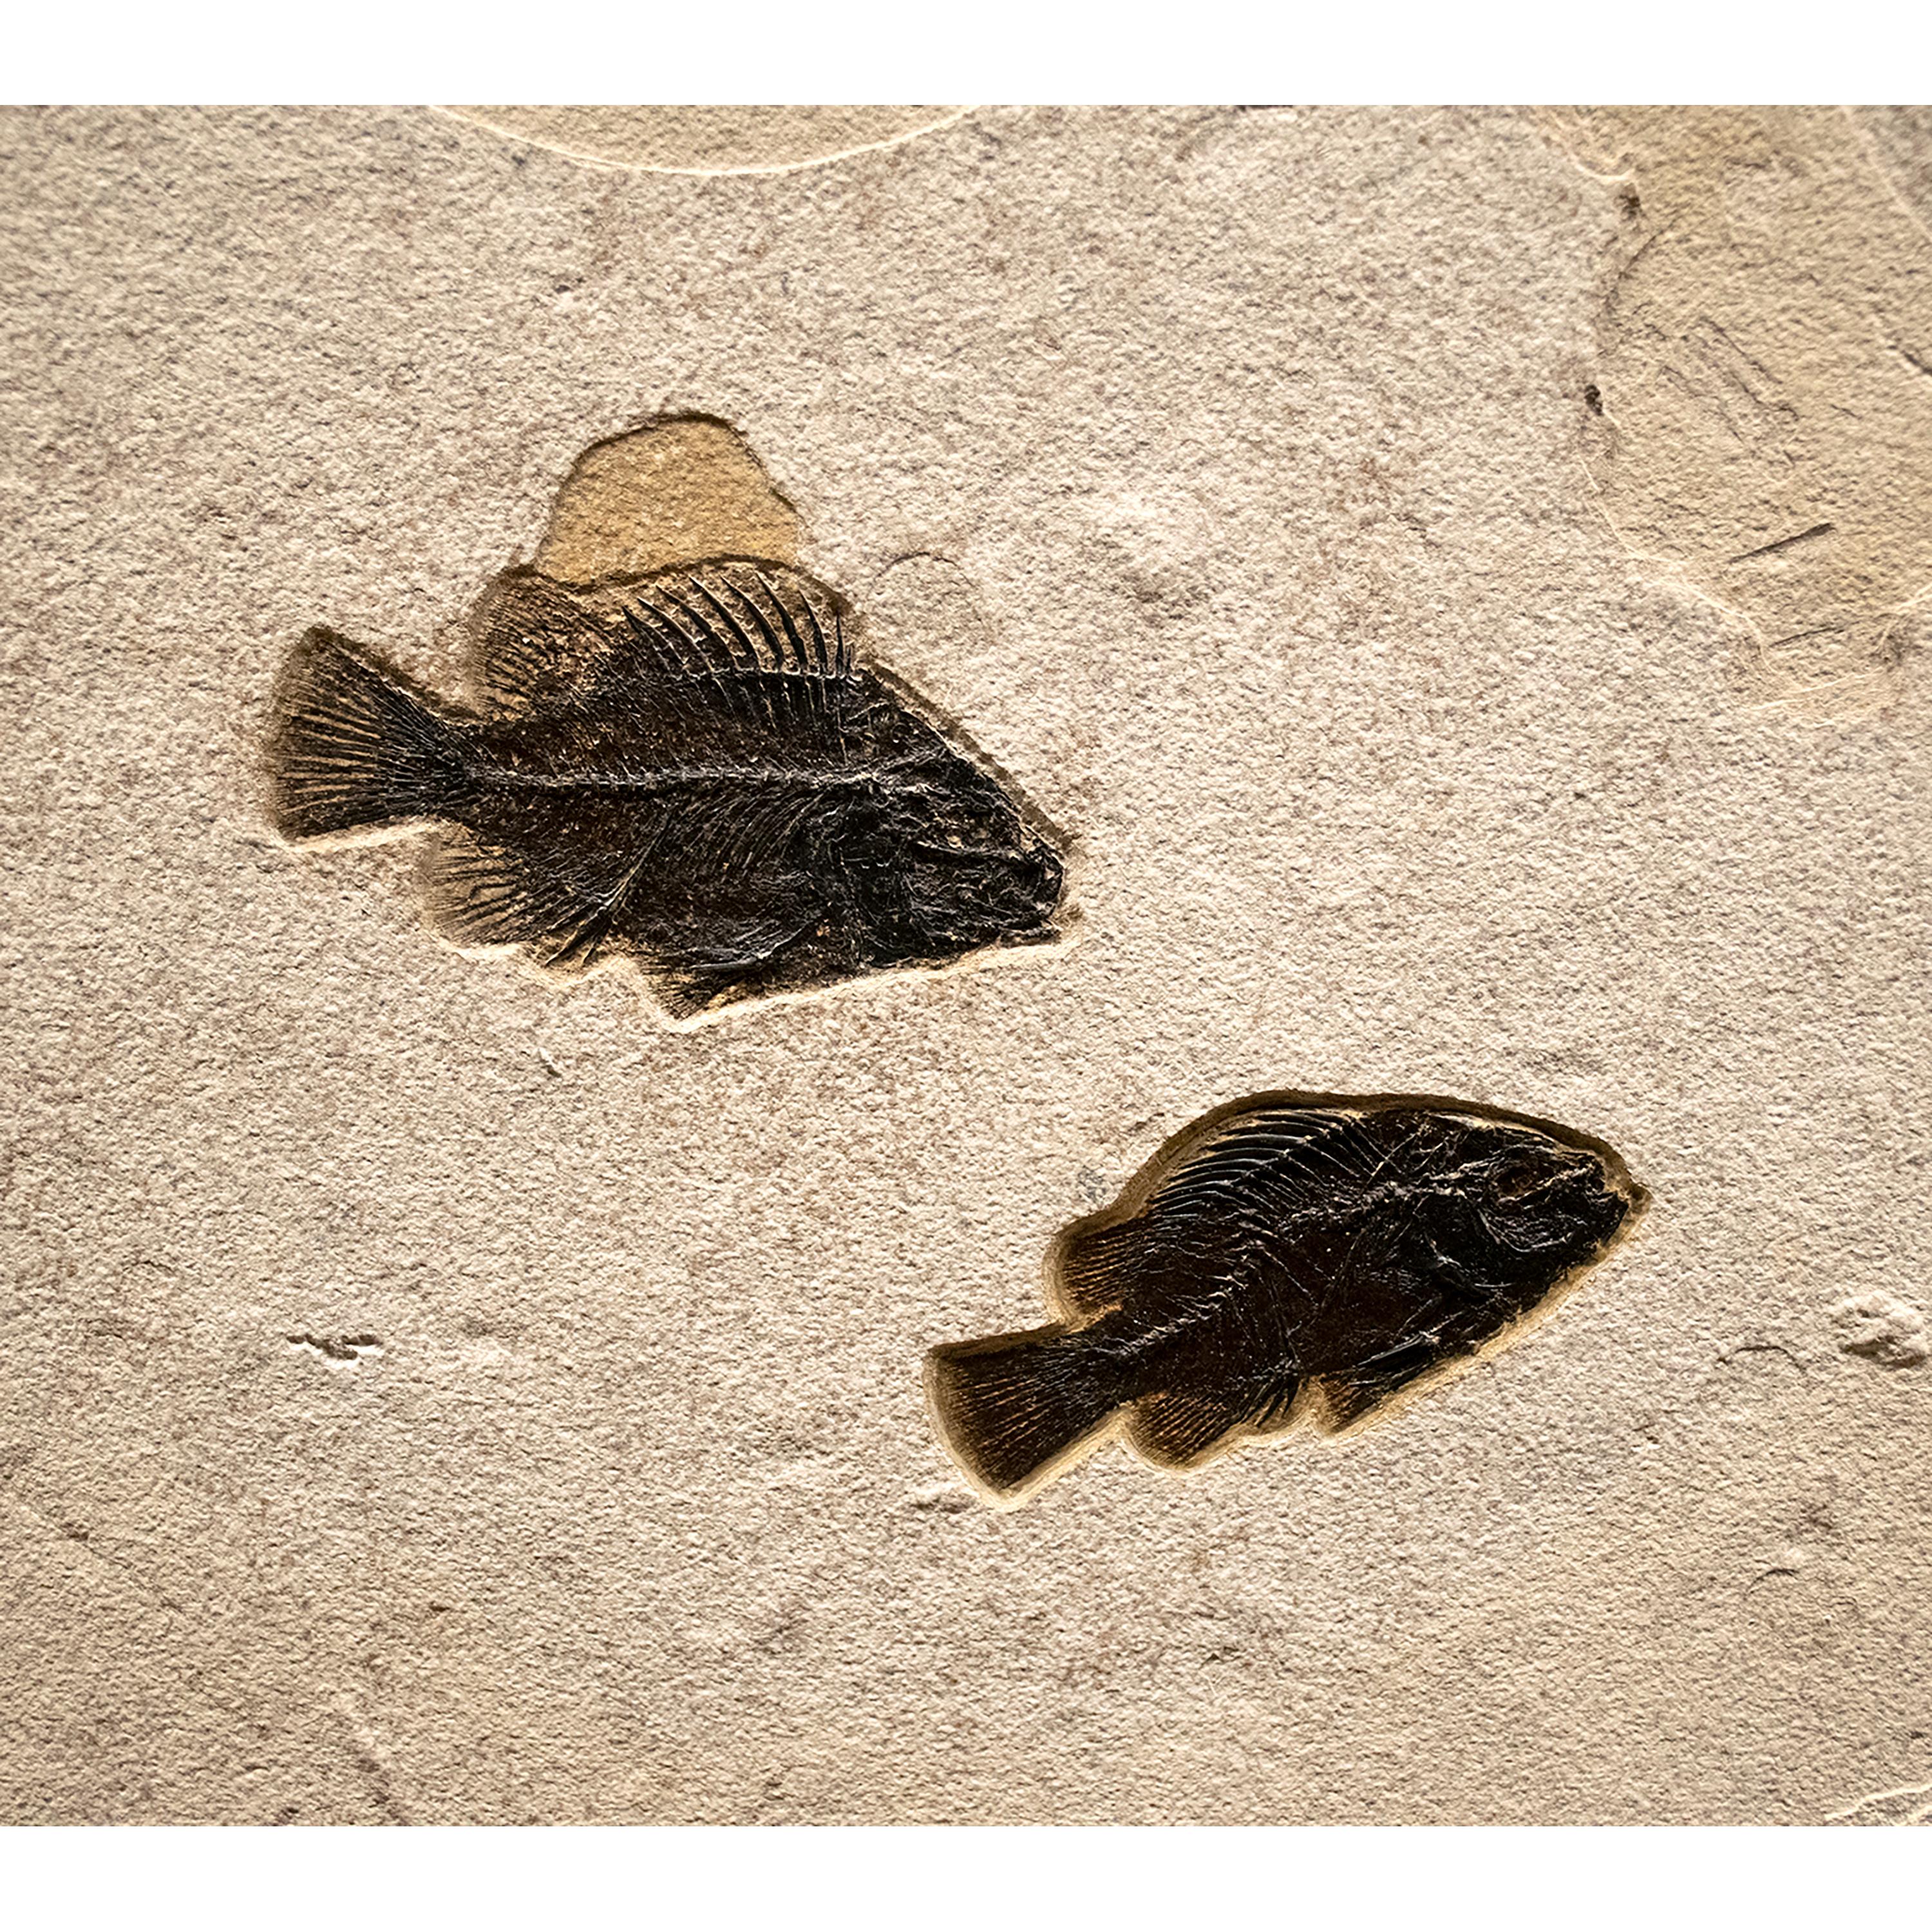 Organic Material 50 Million Year Old Eocene Era Fossil Fish Triptych Mural in Stone, from Wyoming